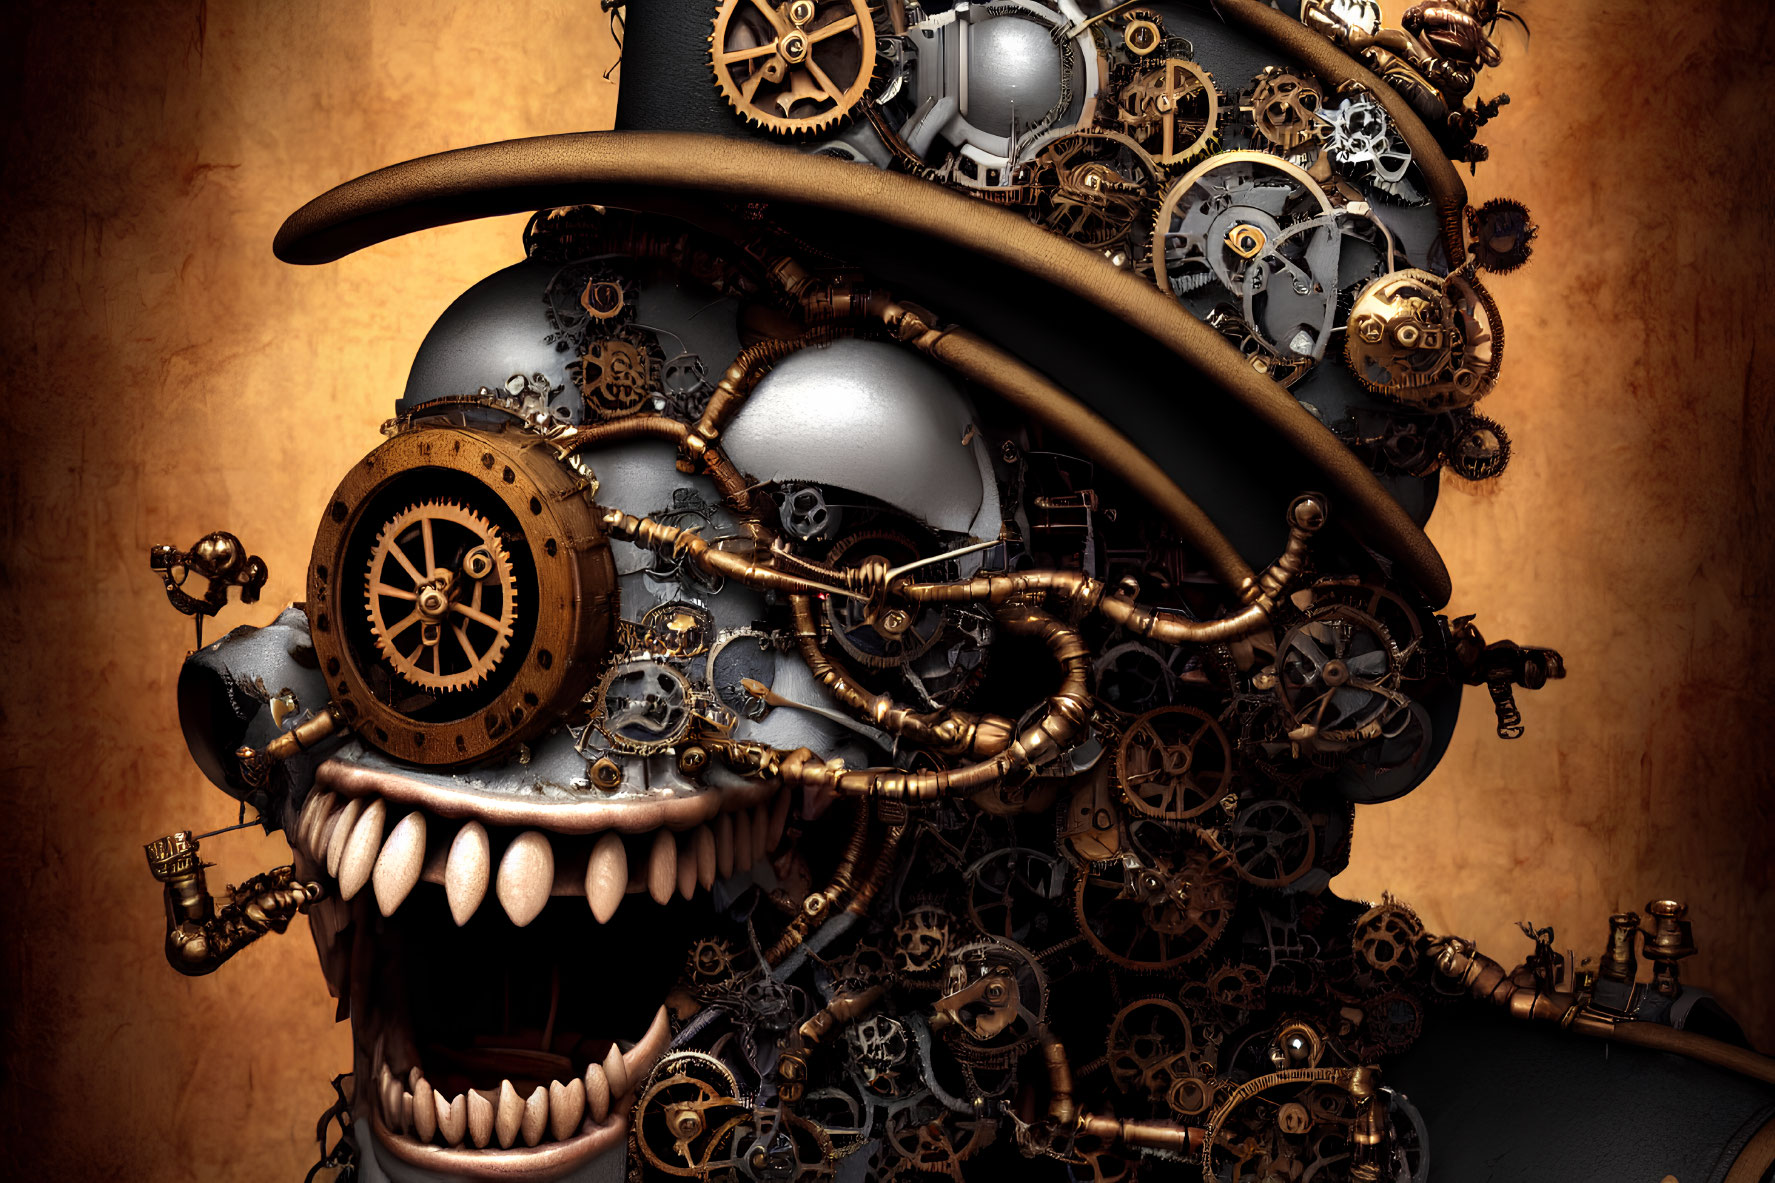 Skull with gears and industrial elements on warm background